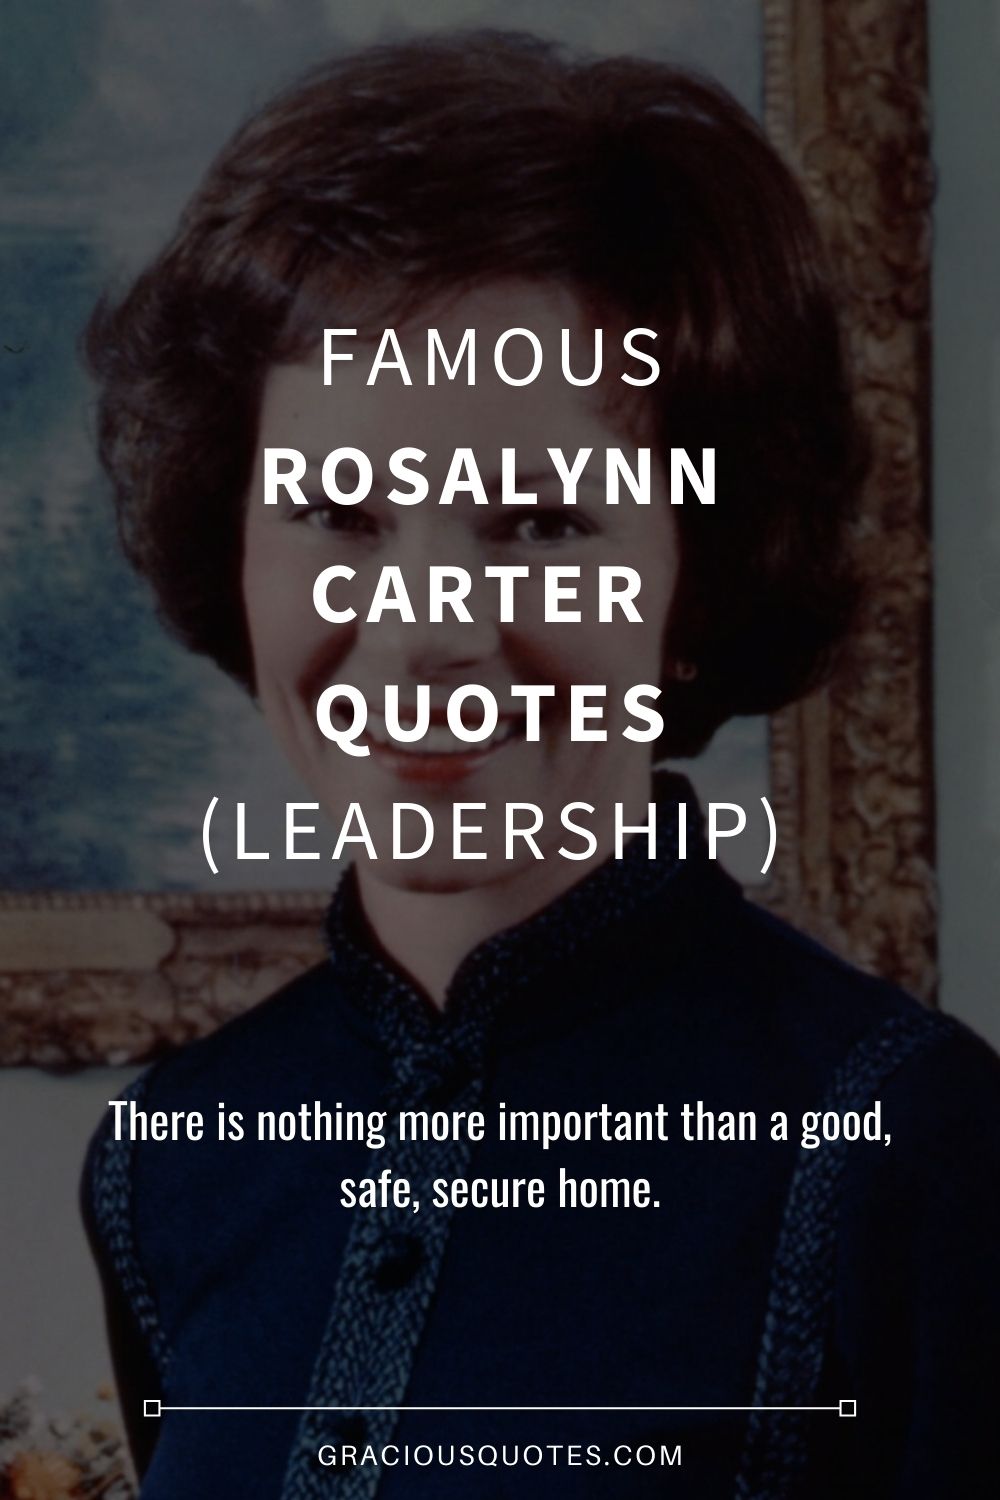 Famous Rosalynn Carter Quotes (LEADERSHIP) - Gracious Quotes